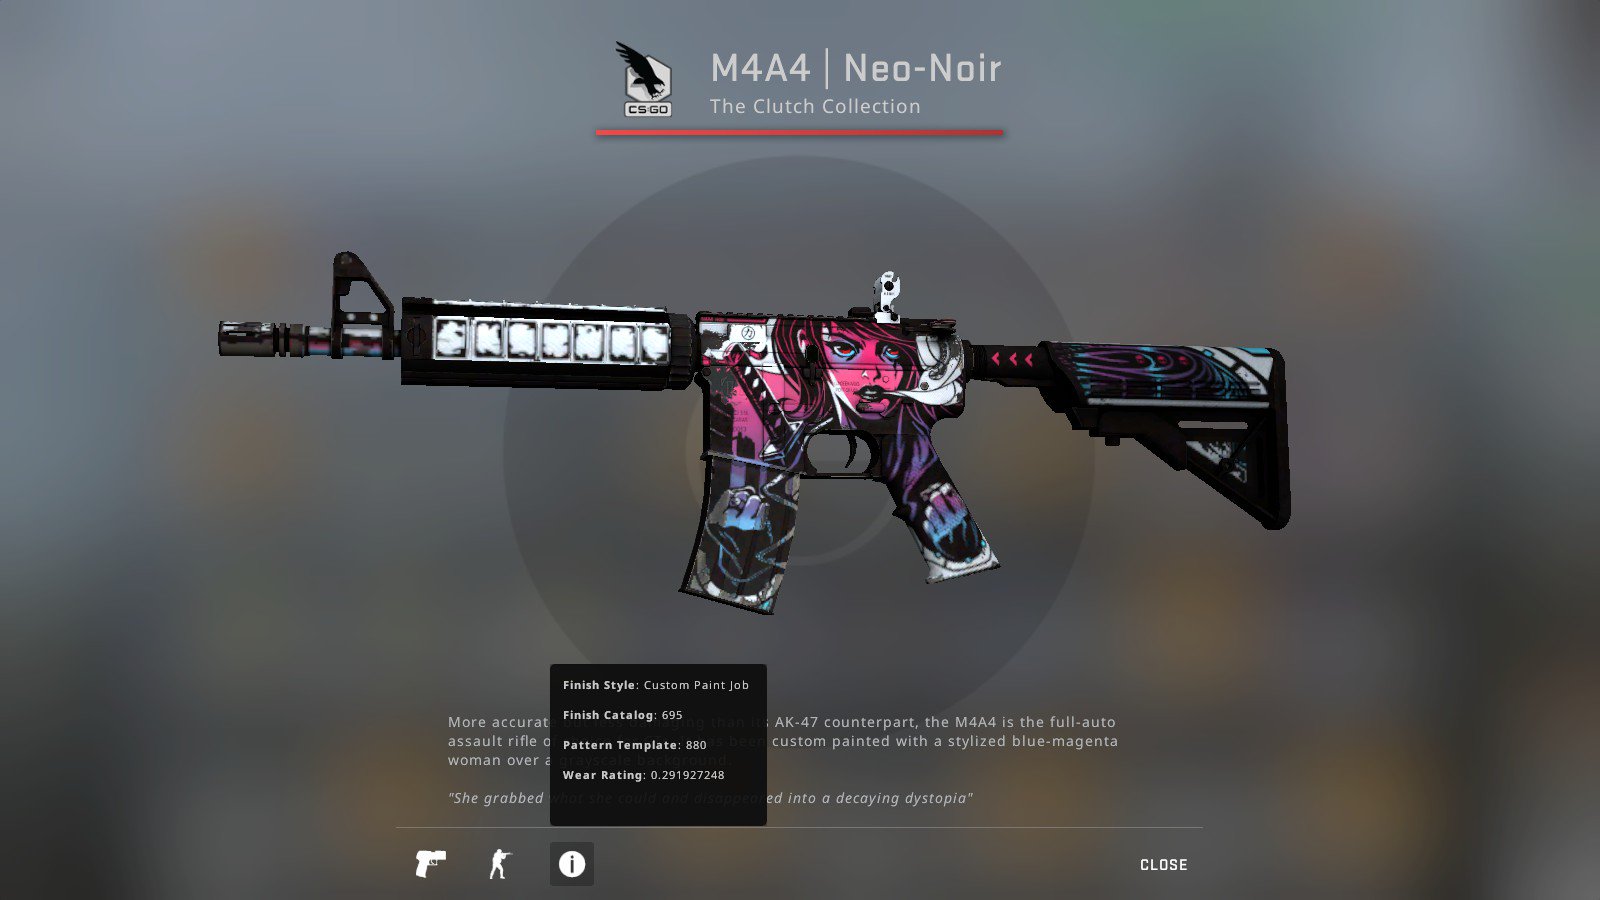 Zadara on Twitter: "🖤M4A4 | Neo-Noir (FT)🖤 • RETWEET🖤 • FOLLOW & @VenixGives • Subscribe https://t.co/zVRX9RyB2n • TAG SOME FRIENDS🖤 ENDING: 24H🖤 GL🍀 https://t.co/LmFtf3hXv8" / Twitter